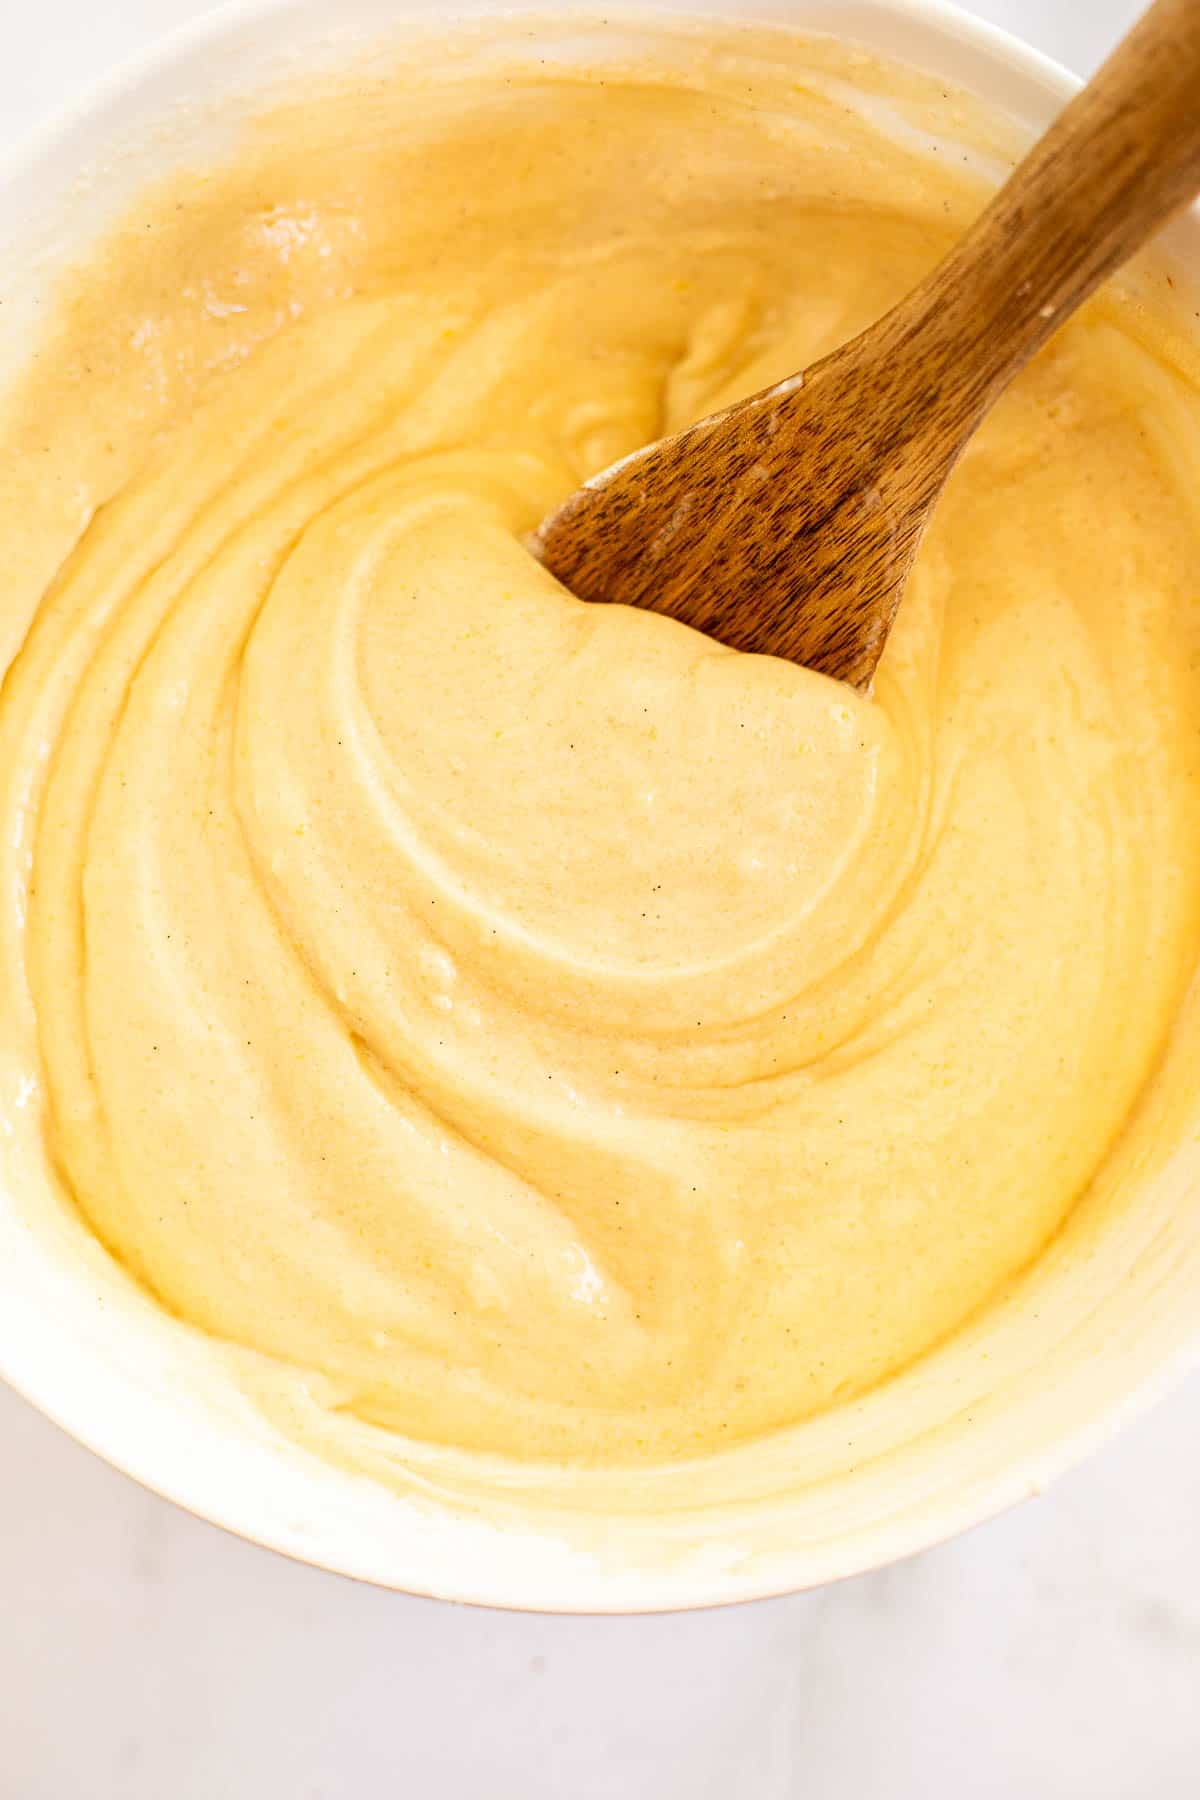 smooth vanilla cupcake batter in a white mixing bowl with a wooden spoon.